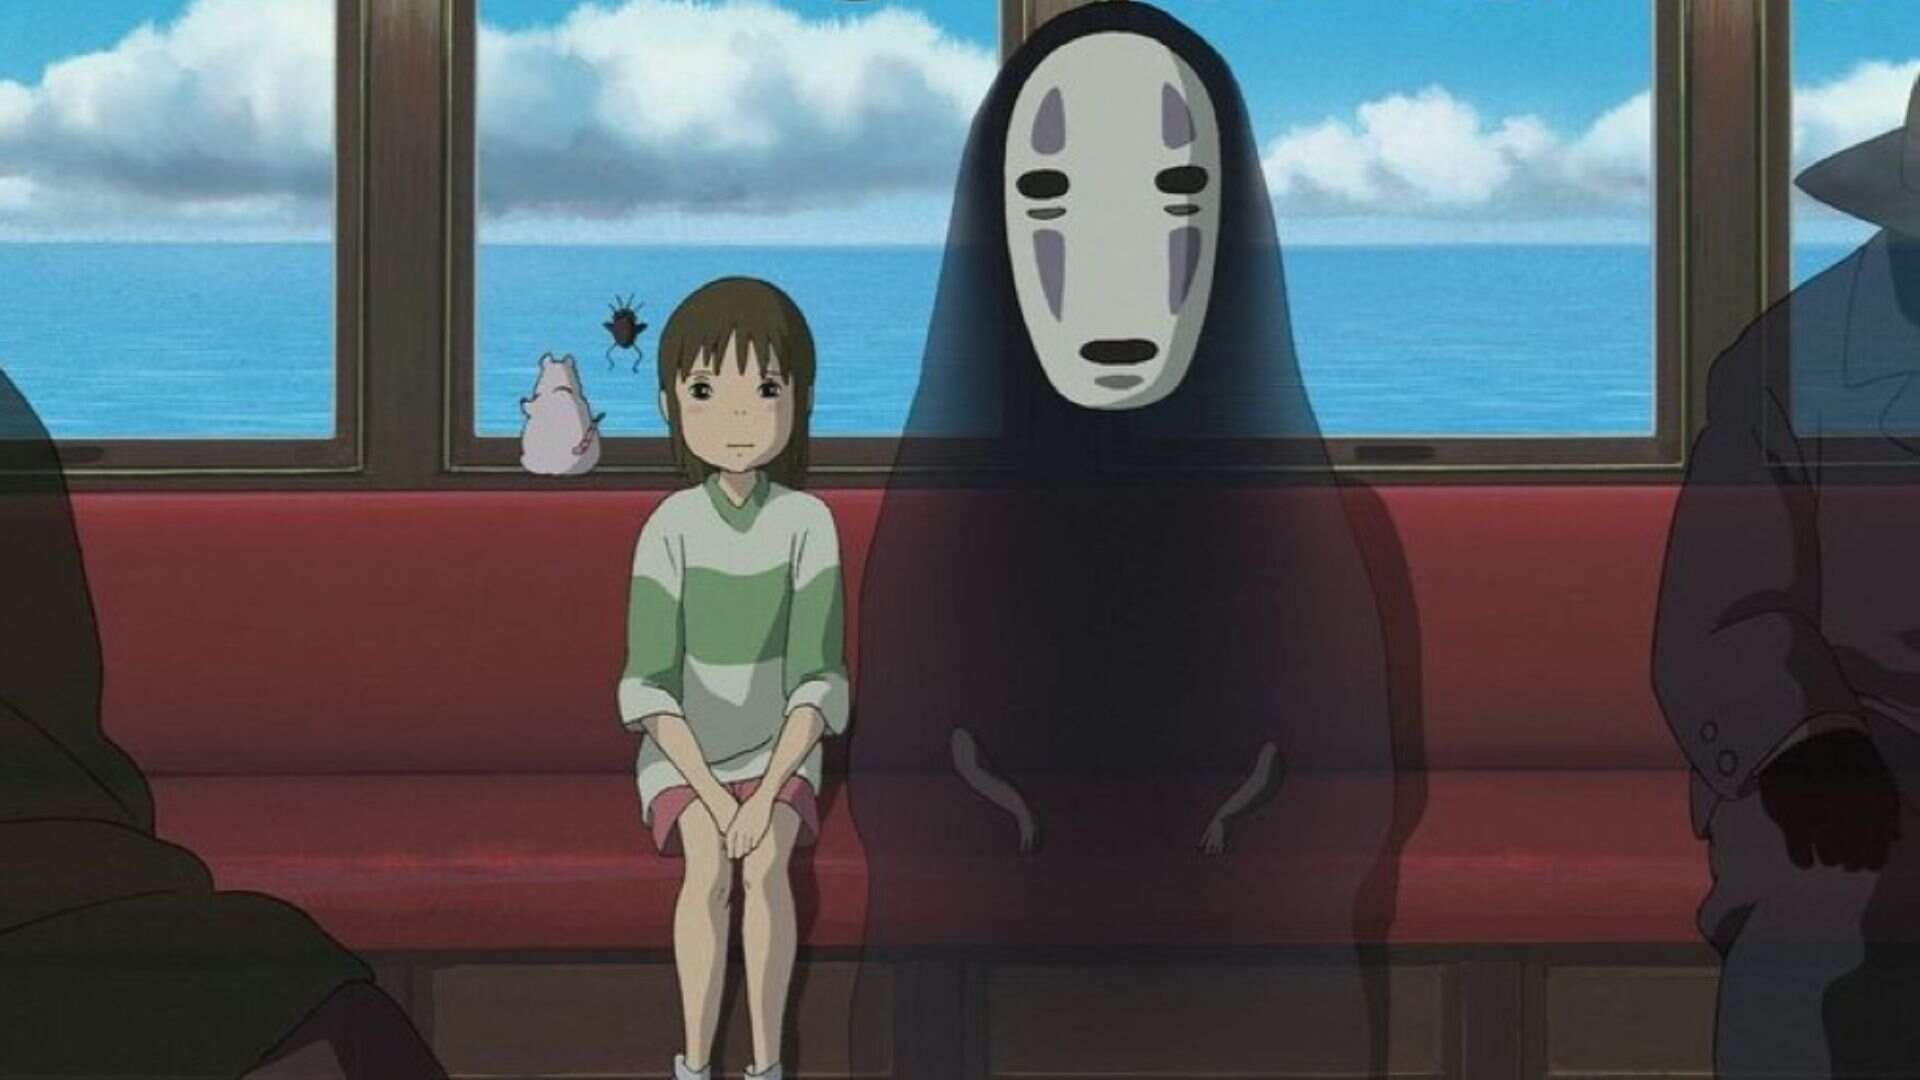 Cannes Film Festival to Present Honorary Palme d’Or to Studio Ghibli